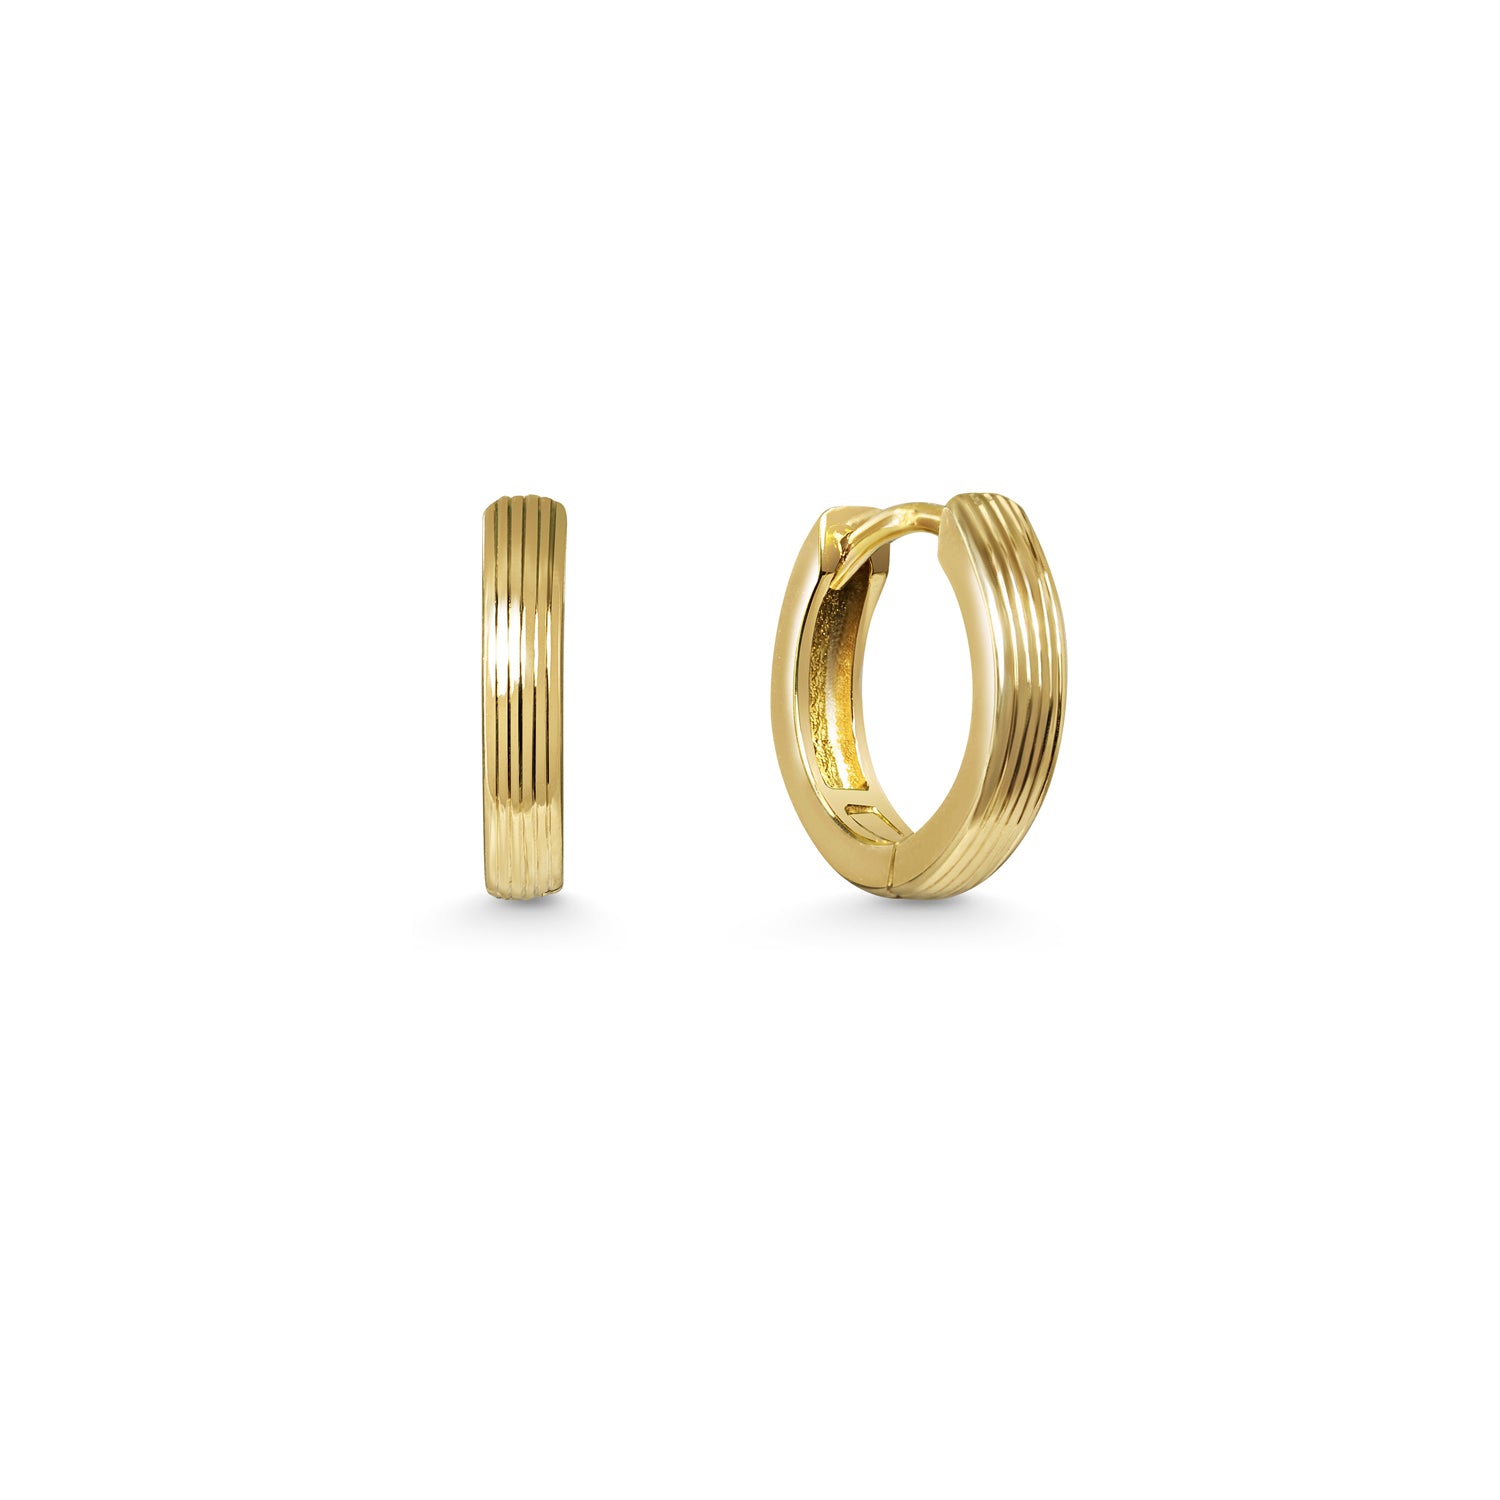 The 12.8mm Engraved Lines Huggie Hoop Earrings by East London jeweller Rachel Boston | Discover our collections of unique and timeless engagement rings, wedding rings, and modern fine jewellery.